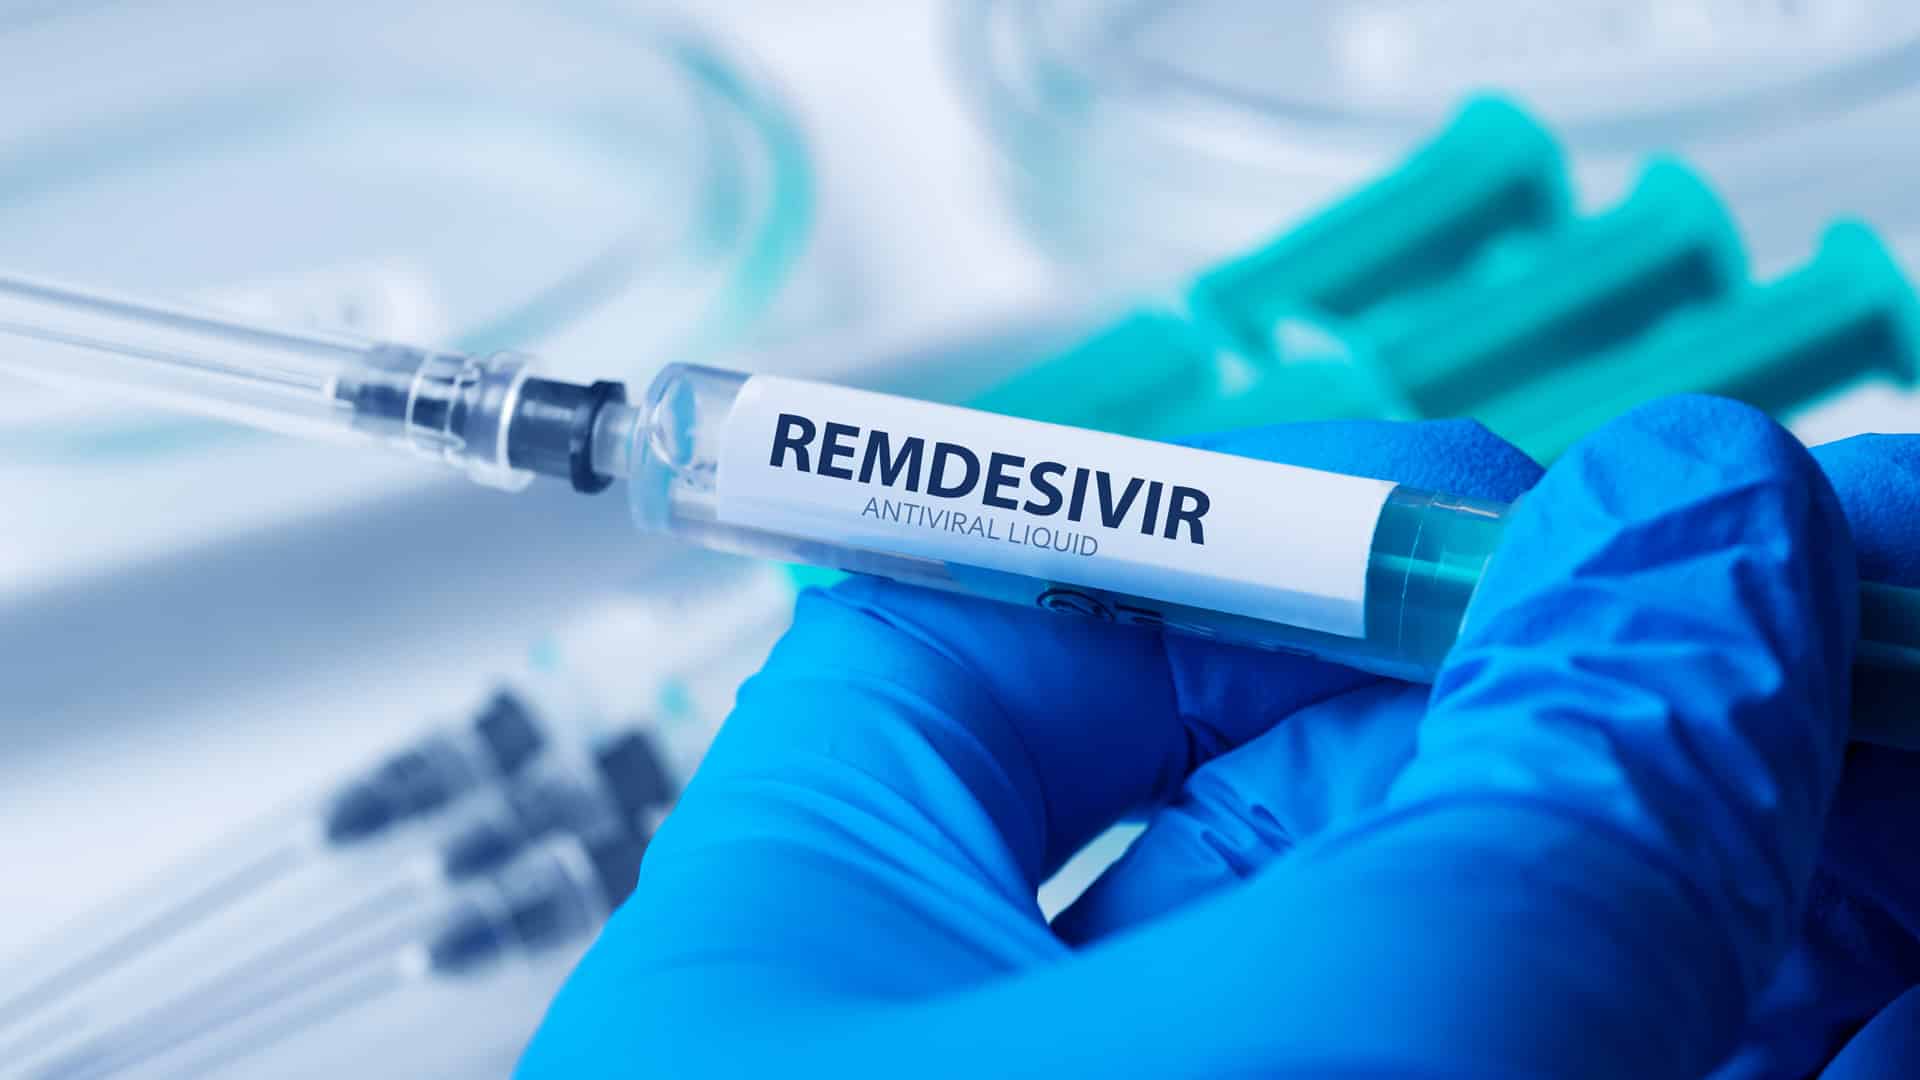 Delhi HC questions new remdesivir protocol, says seems ‘Centre wants people to die’